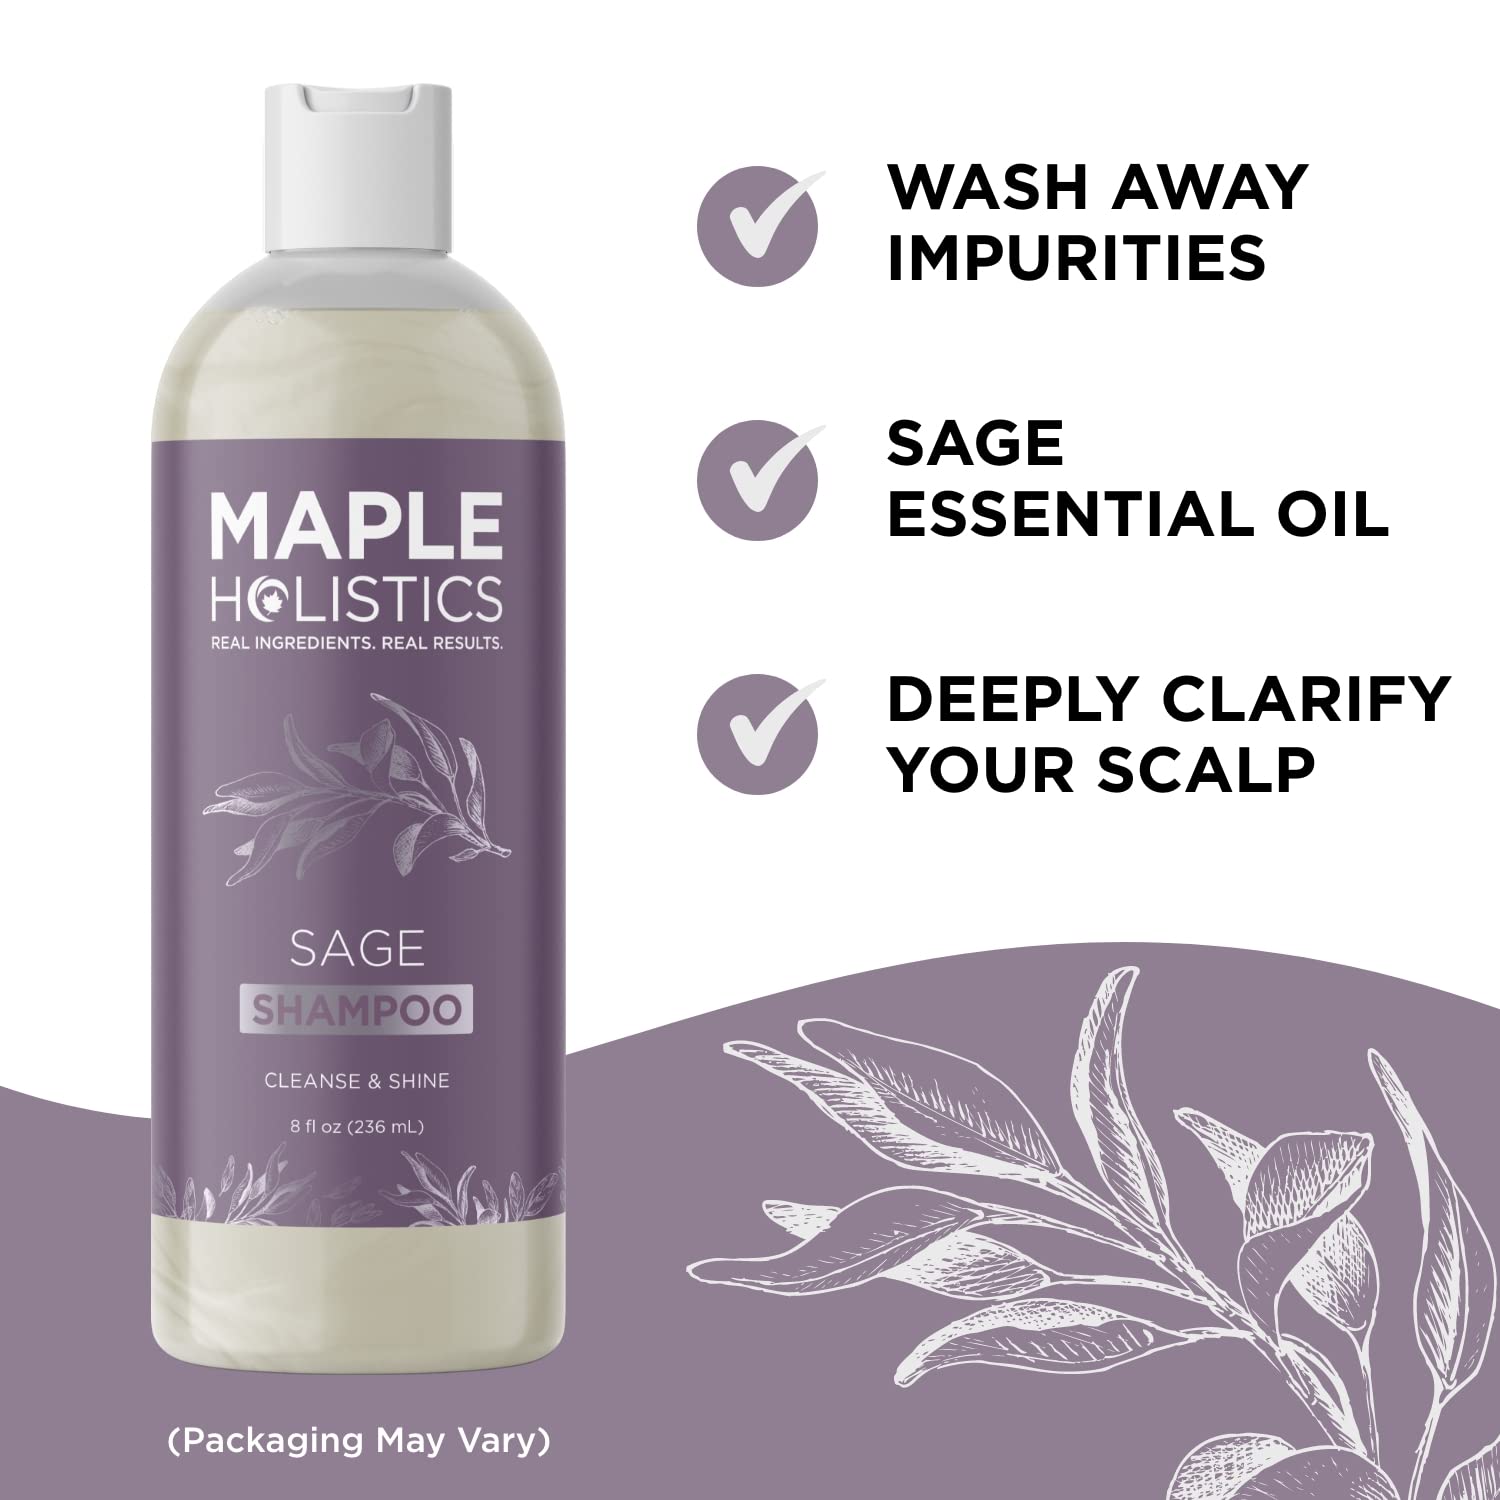 Clarifying Shampoo for Oily Hair and Scalp - Sulfate Free Shampoo with Rosemary Oil Sage and Tea Tree Oil for Hair and Scalp Cleanser - Dry Scalp Shampoo for Men and Women, 8 fl oz - image 3 of 7